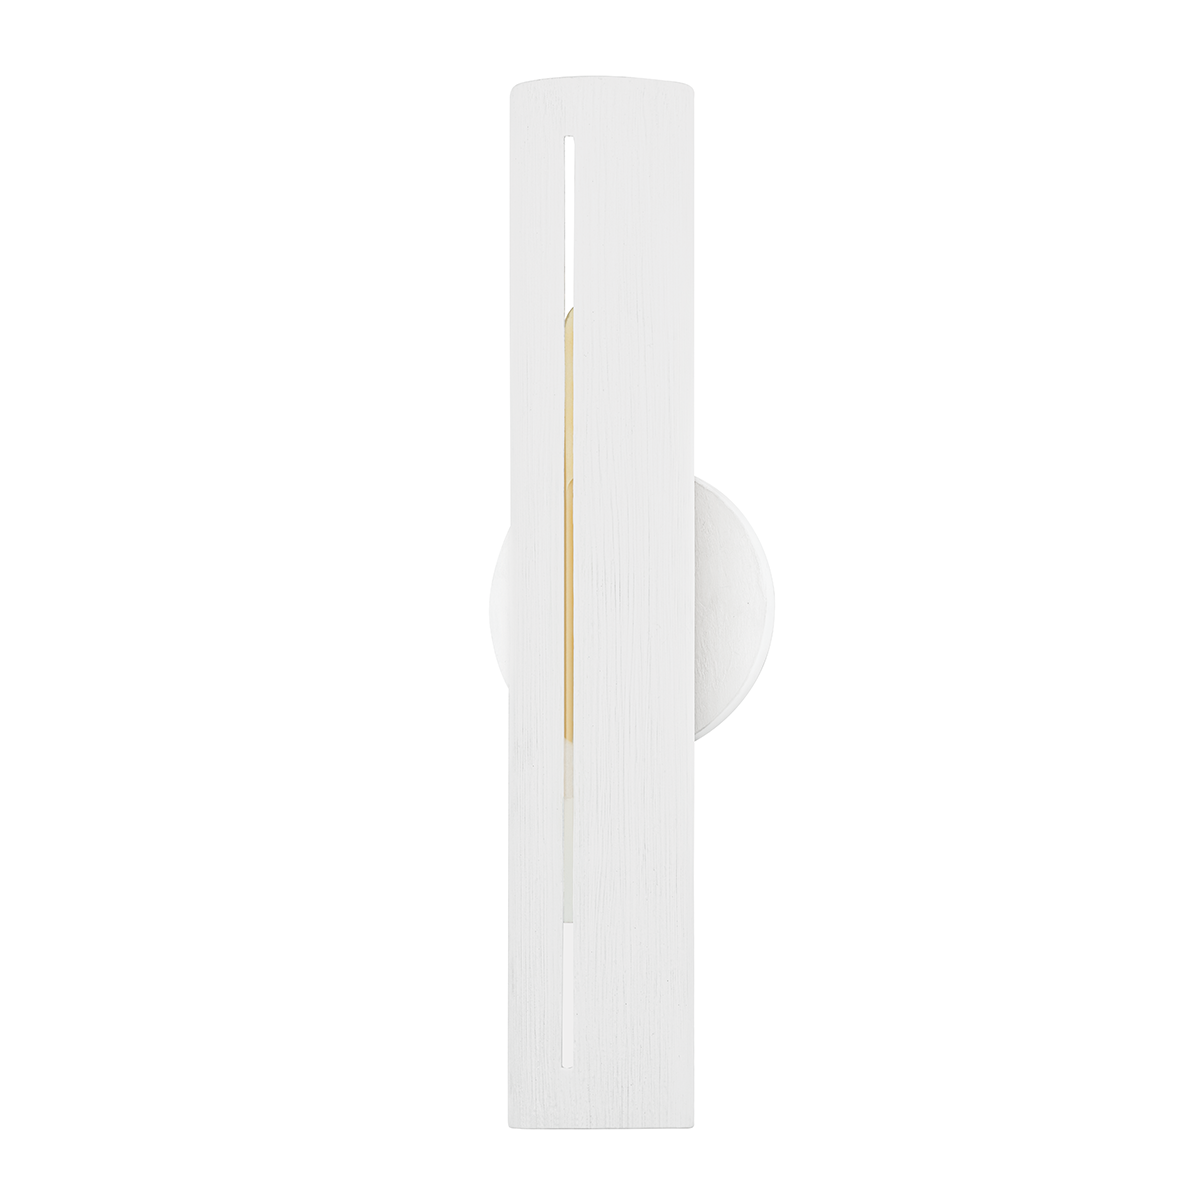 Troy Lighting Brandon Wall Sconce Wall Sconce Troy Lighting GESSO WHITE 5x5x17.75 